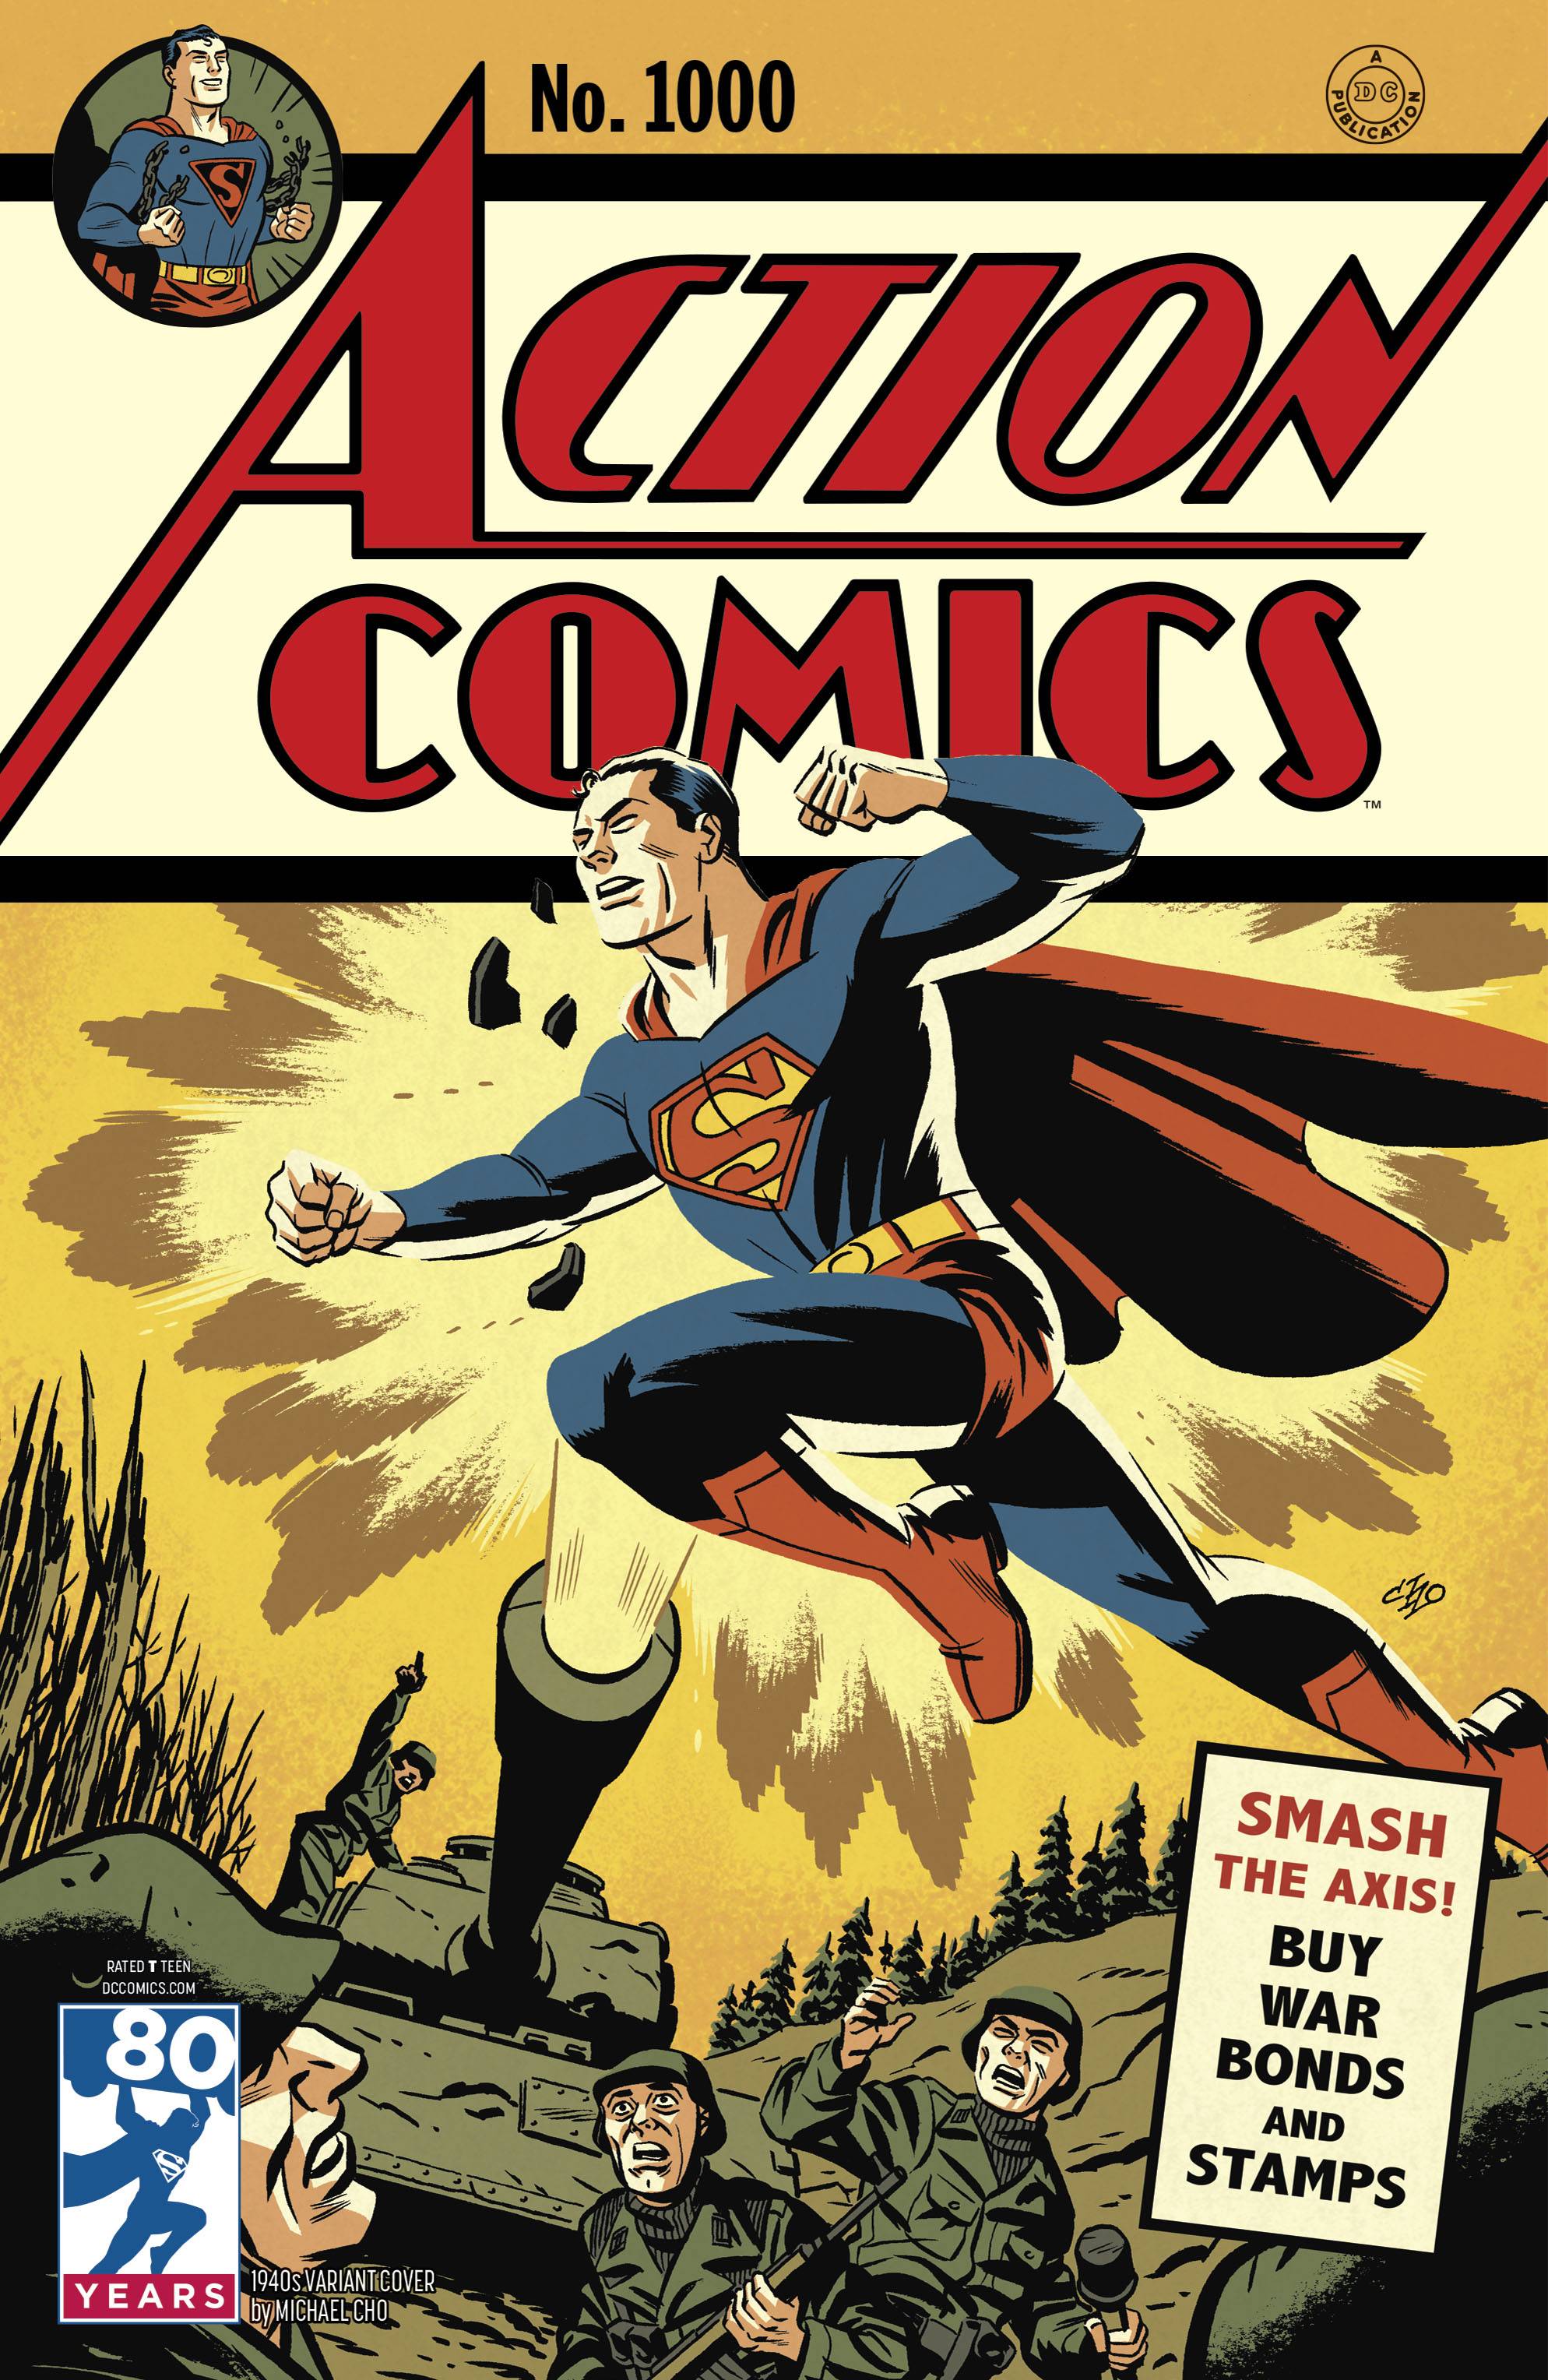 Action Comics #1000 1940s Variant Edition (1938)